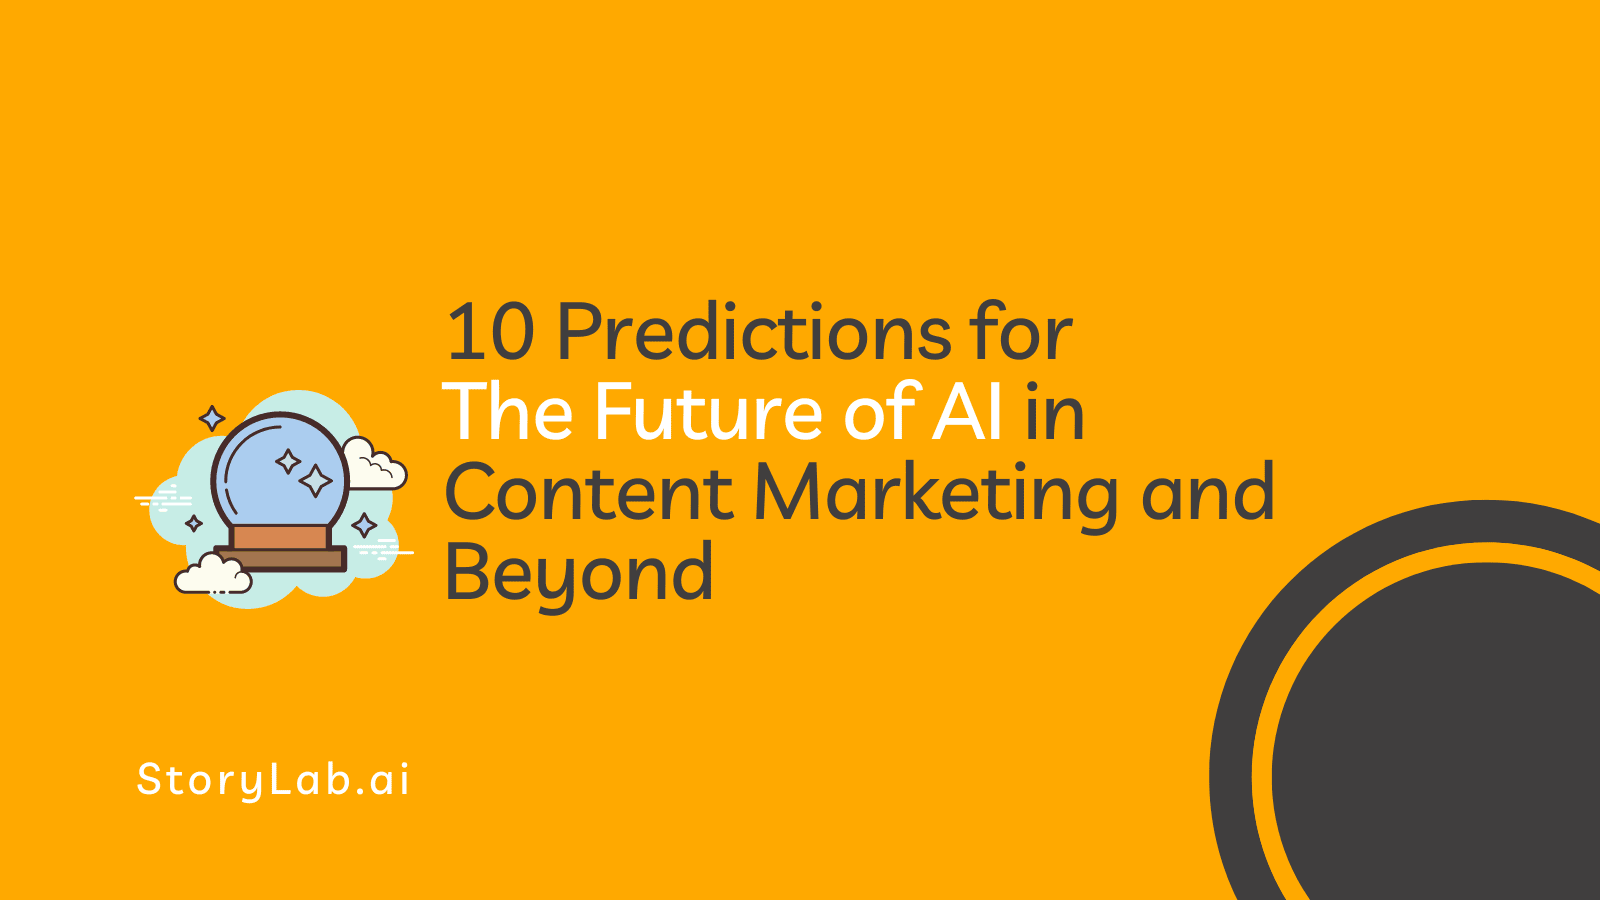 Predictions for the Future of AI in Content Marketing and Beyond